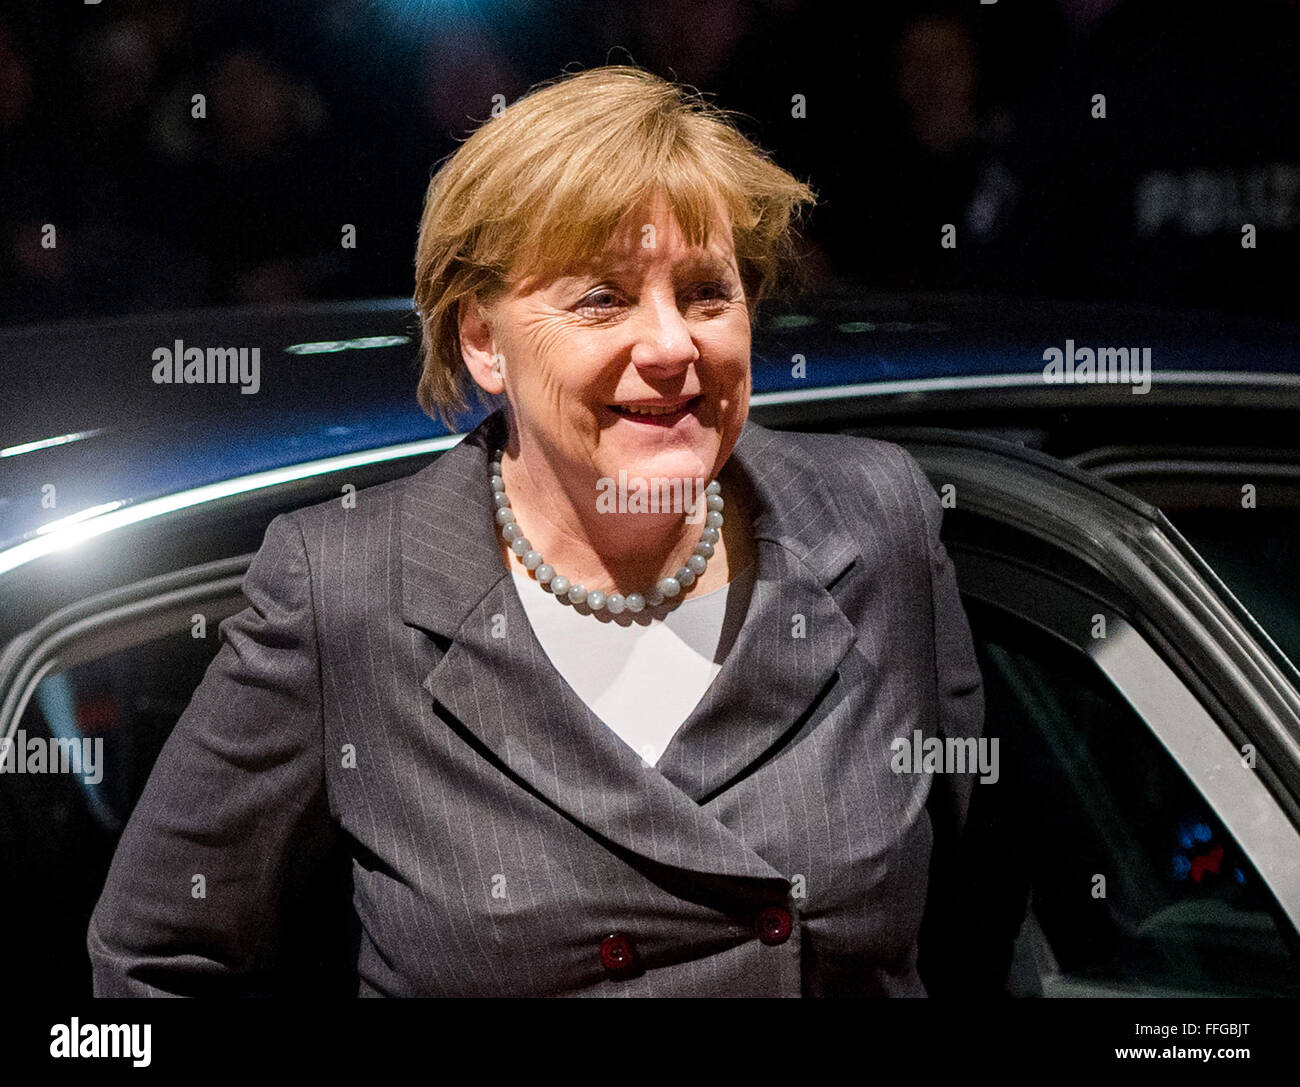 Hamburg, Germany. 12th Feb, 2016. German Chancellor Angela Merkel arrives to the annual Matthiae dinner at the city hall of Hamburg, Germany, 12 February 2016. Britain's Prime Minister David Cameron and German Chancellor Angela Merkel are guests of honour at the oldest feast in the world. Since 1356, the leaders of the Hansa city invite distinguished guests to the Matthiae dinner. Photo: DANIEL BOCKWOLDT/dpa/Alamy Live News Stock Photo